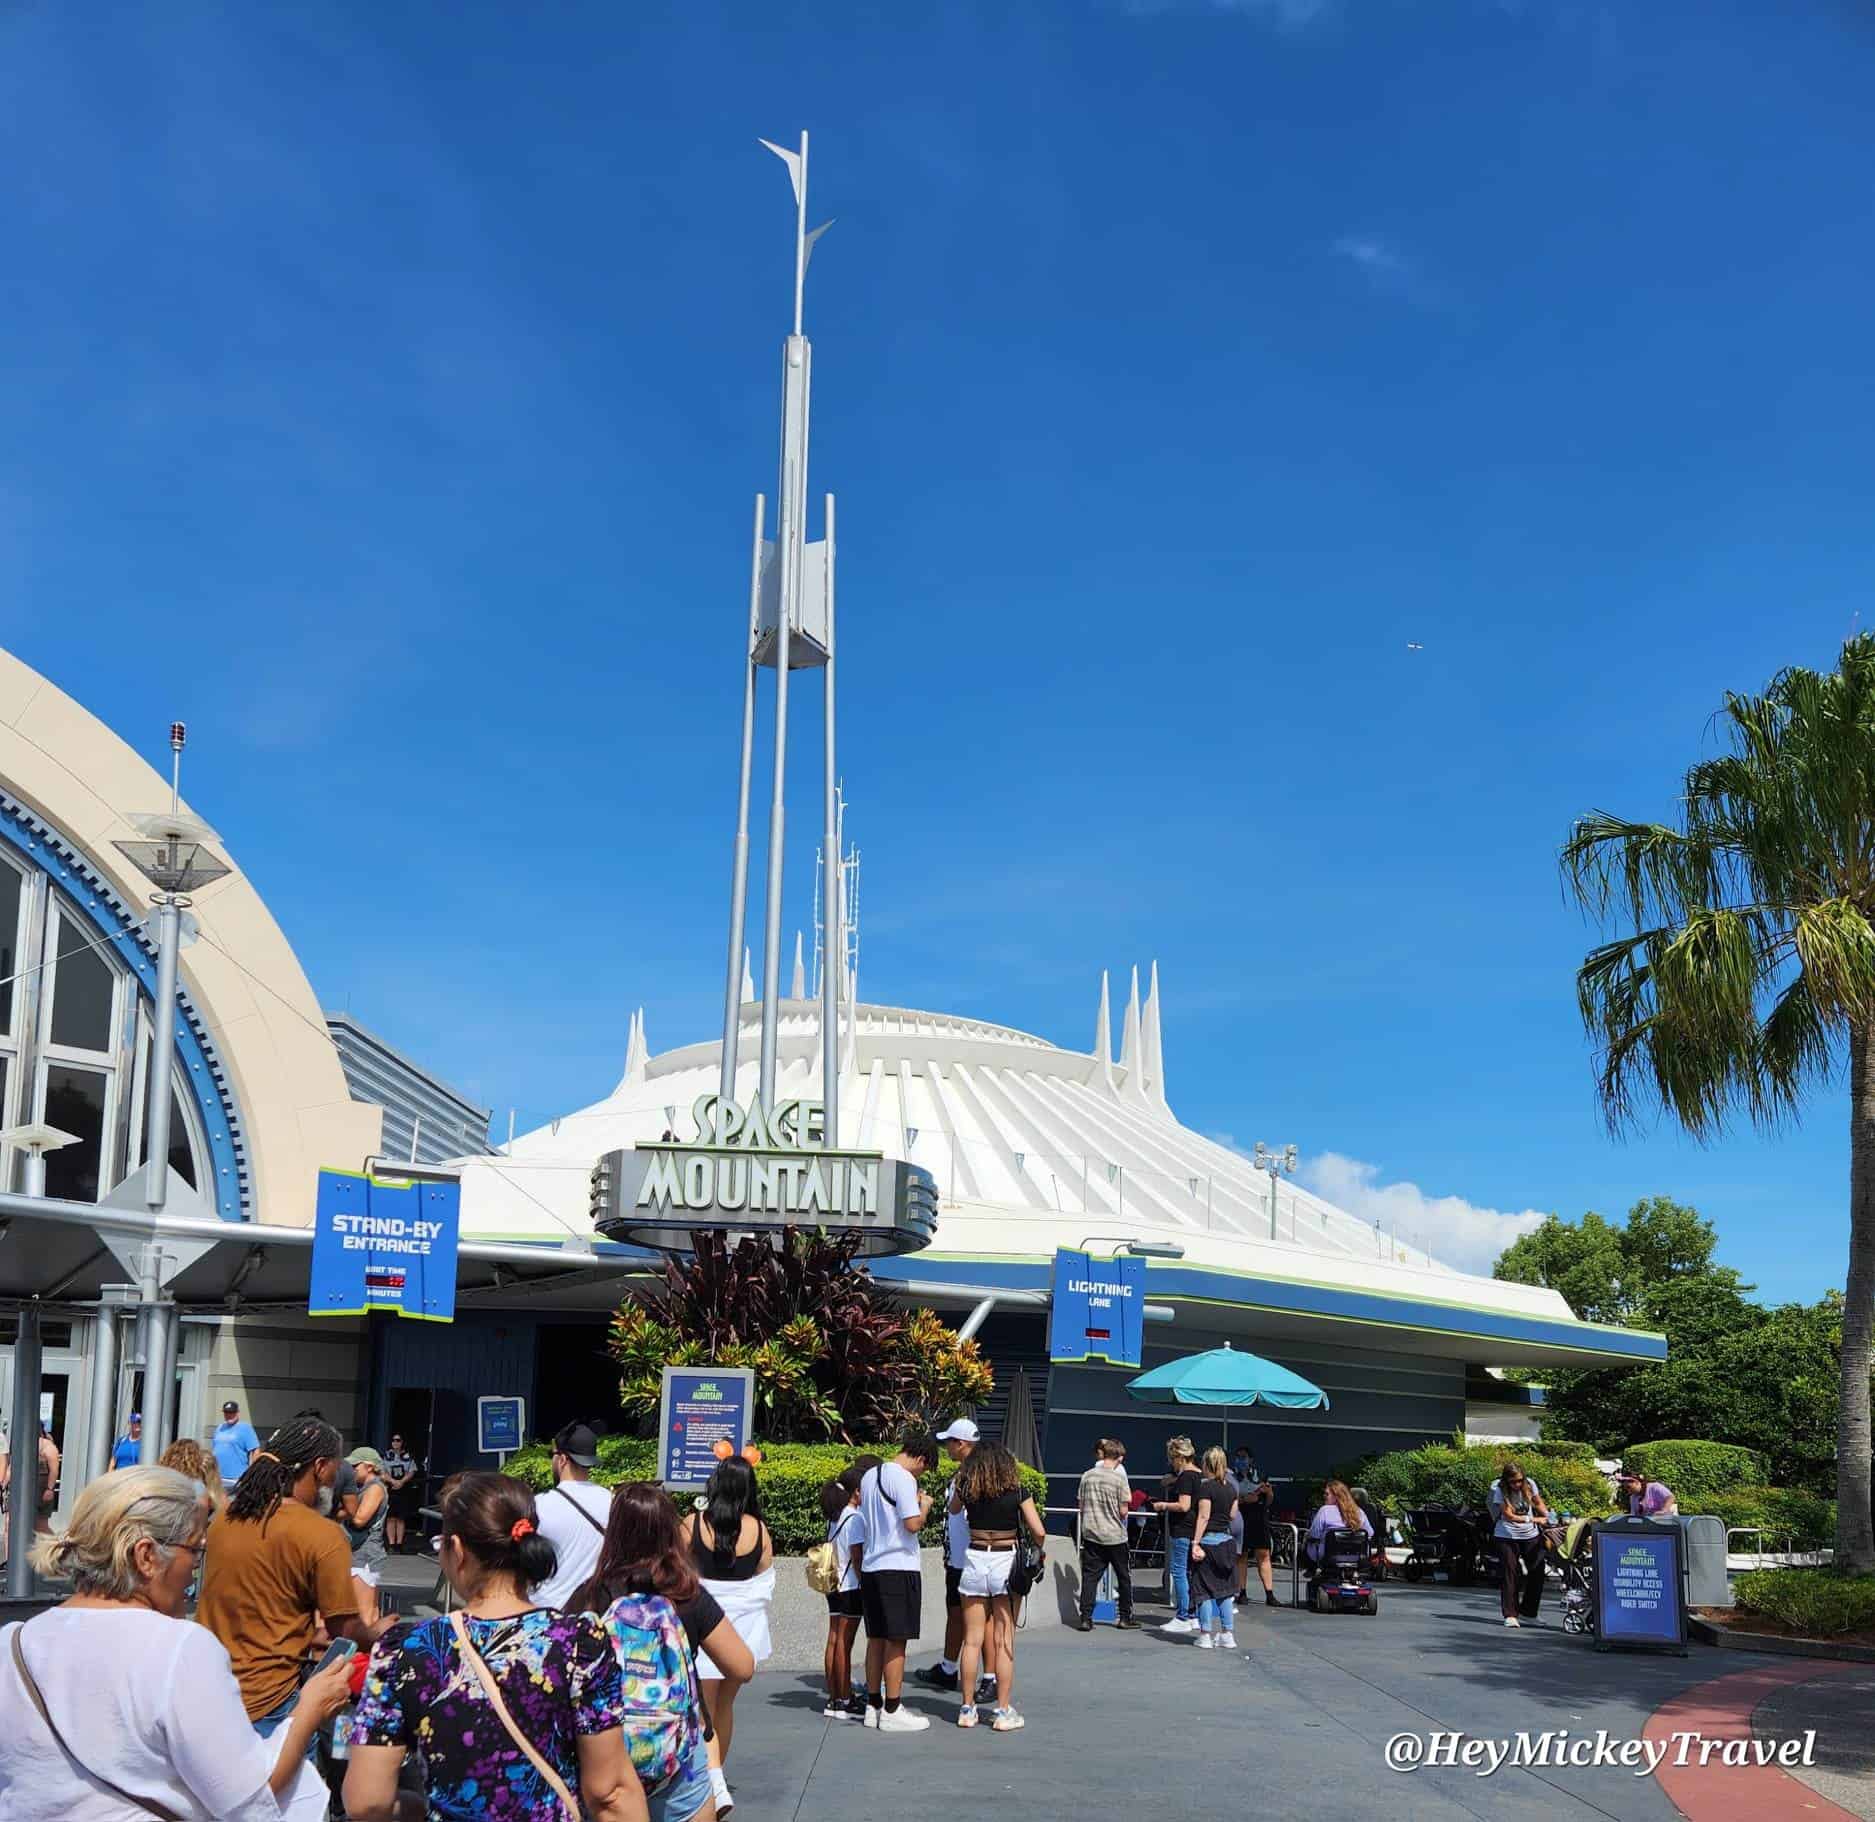 Space Mountain is one of the fastest rides at Disney World